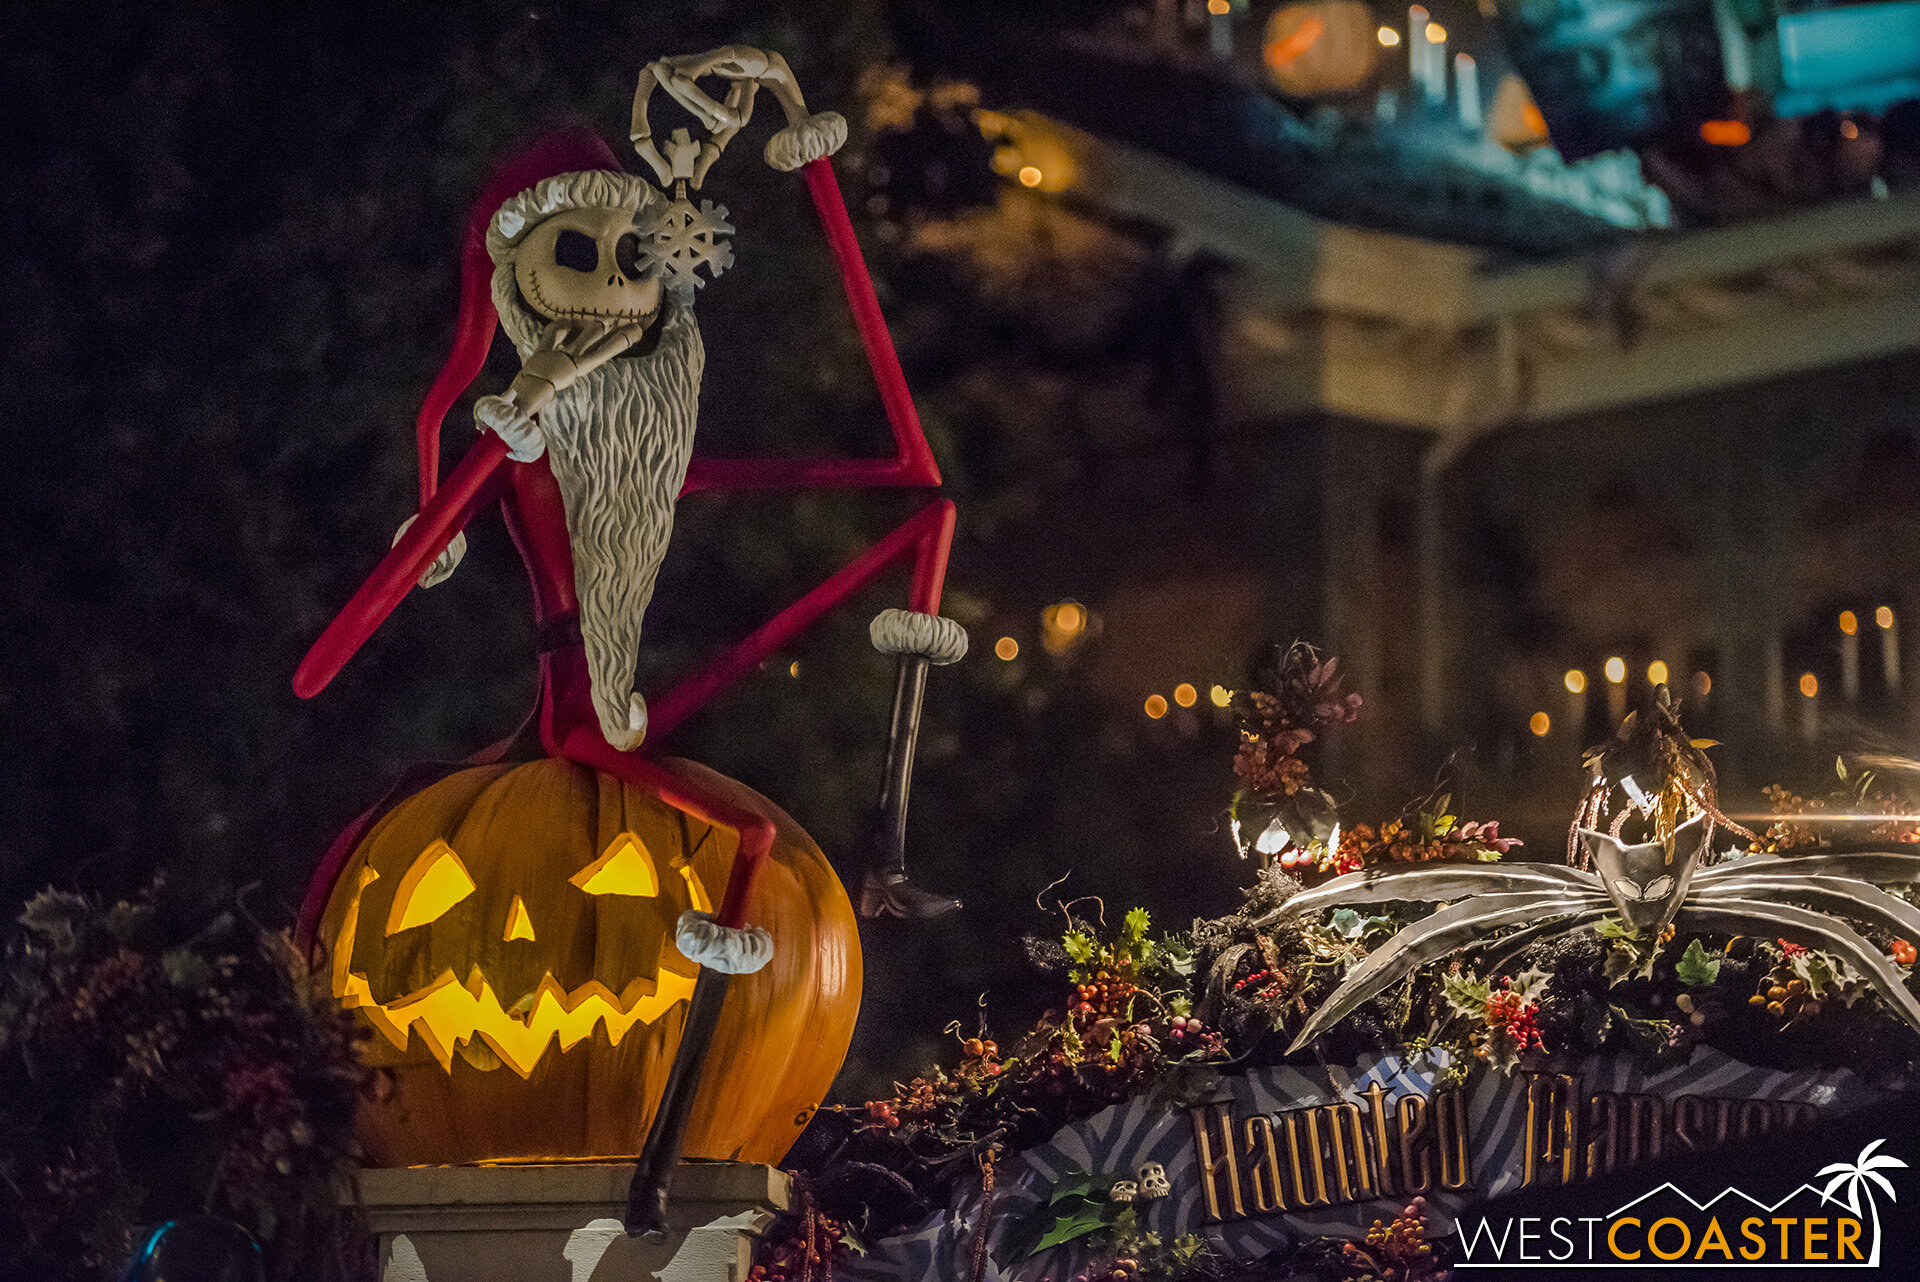  Of course, Haunted Mansion is all Holiday’d up. 